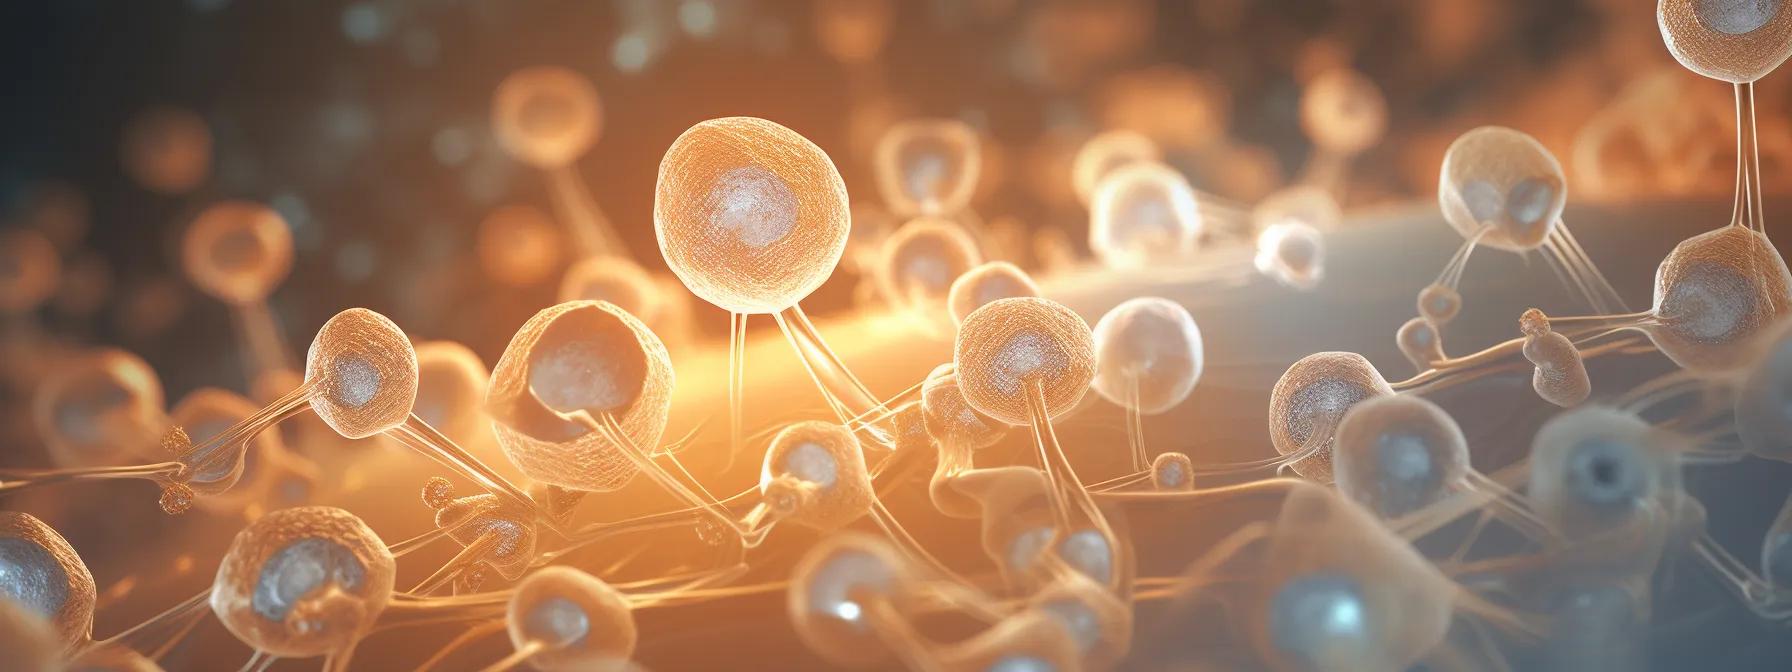 a close-up of a yeast cell undergoing fermentation, with oxygen molecules floating around it.